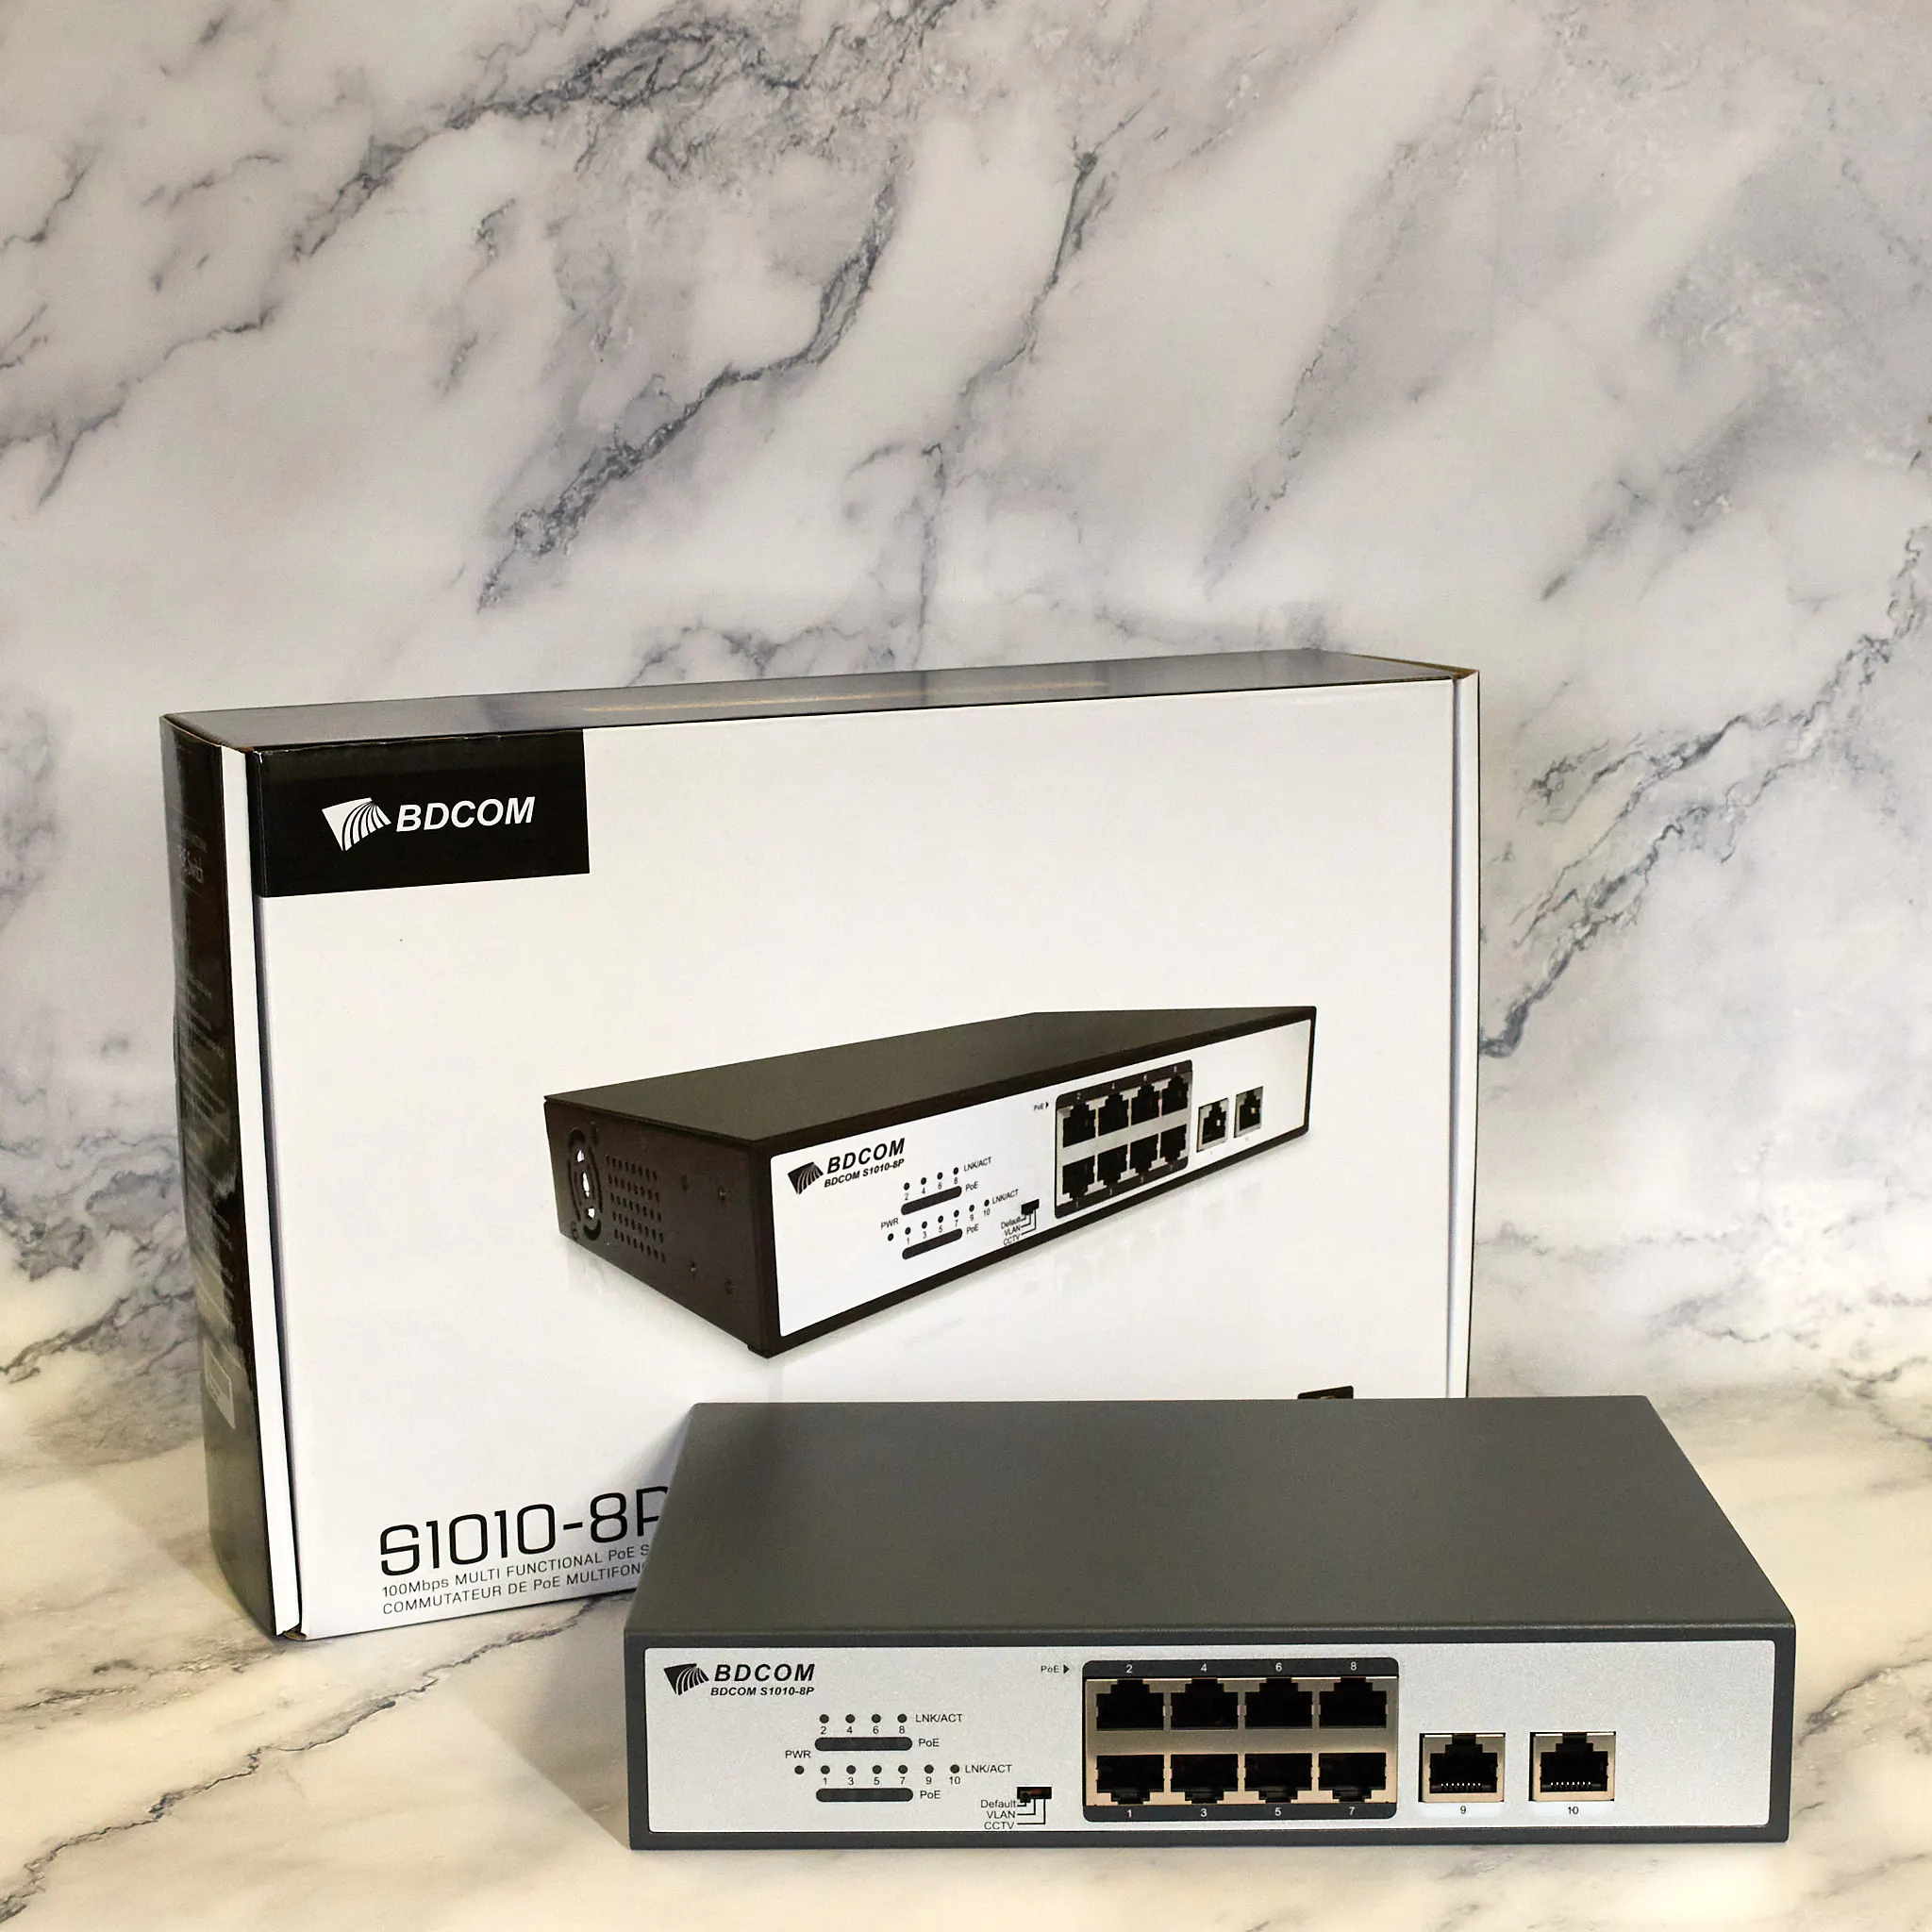 BDCOM 8-port PoE switch with the retail box in the background